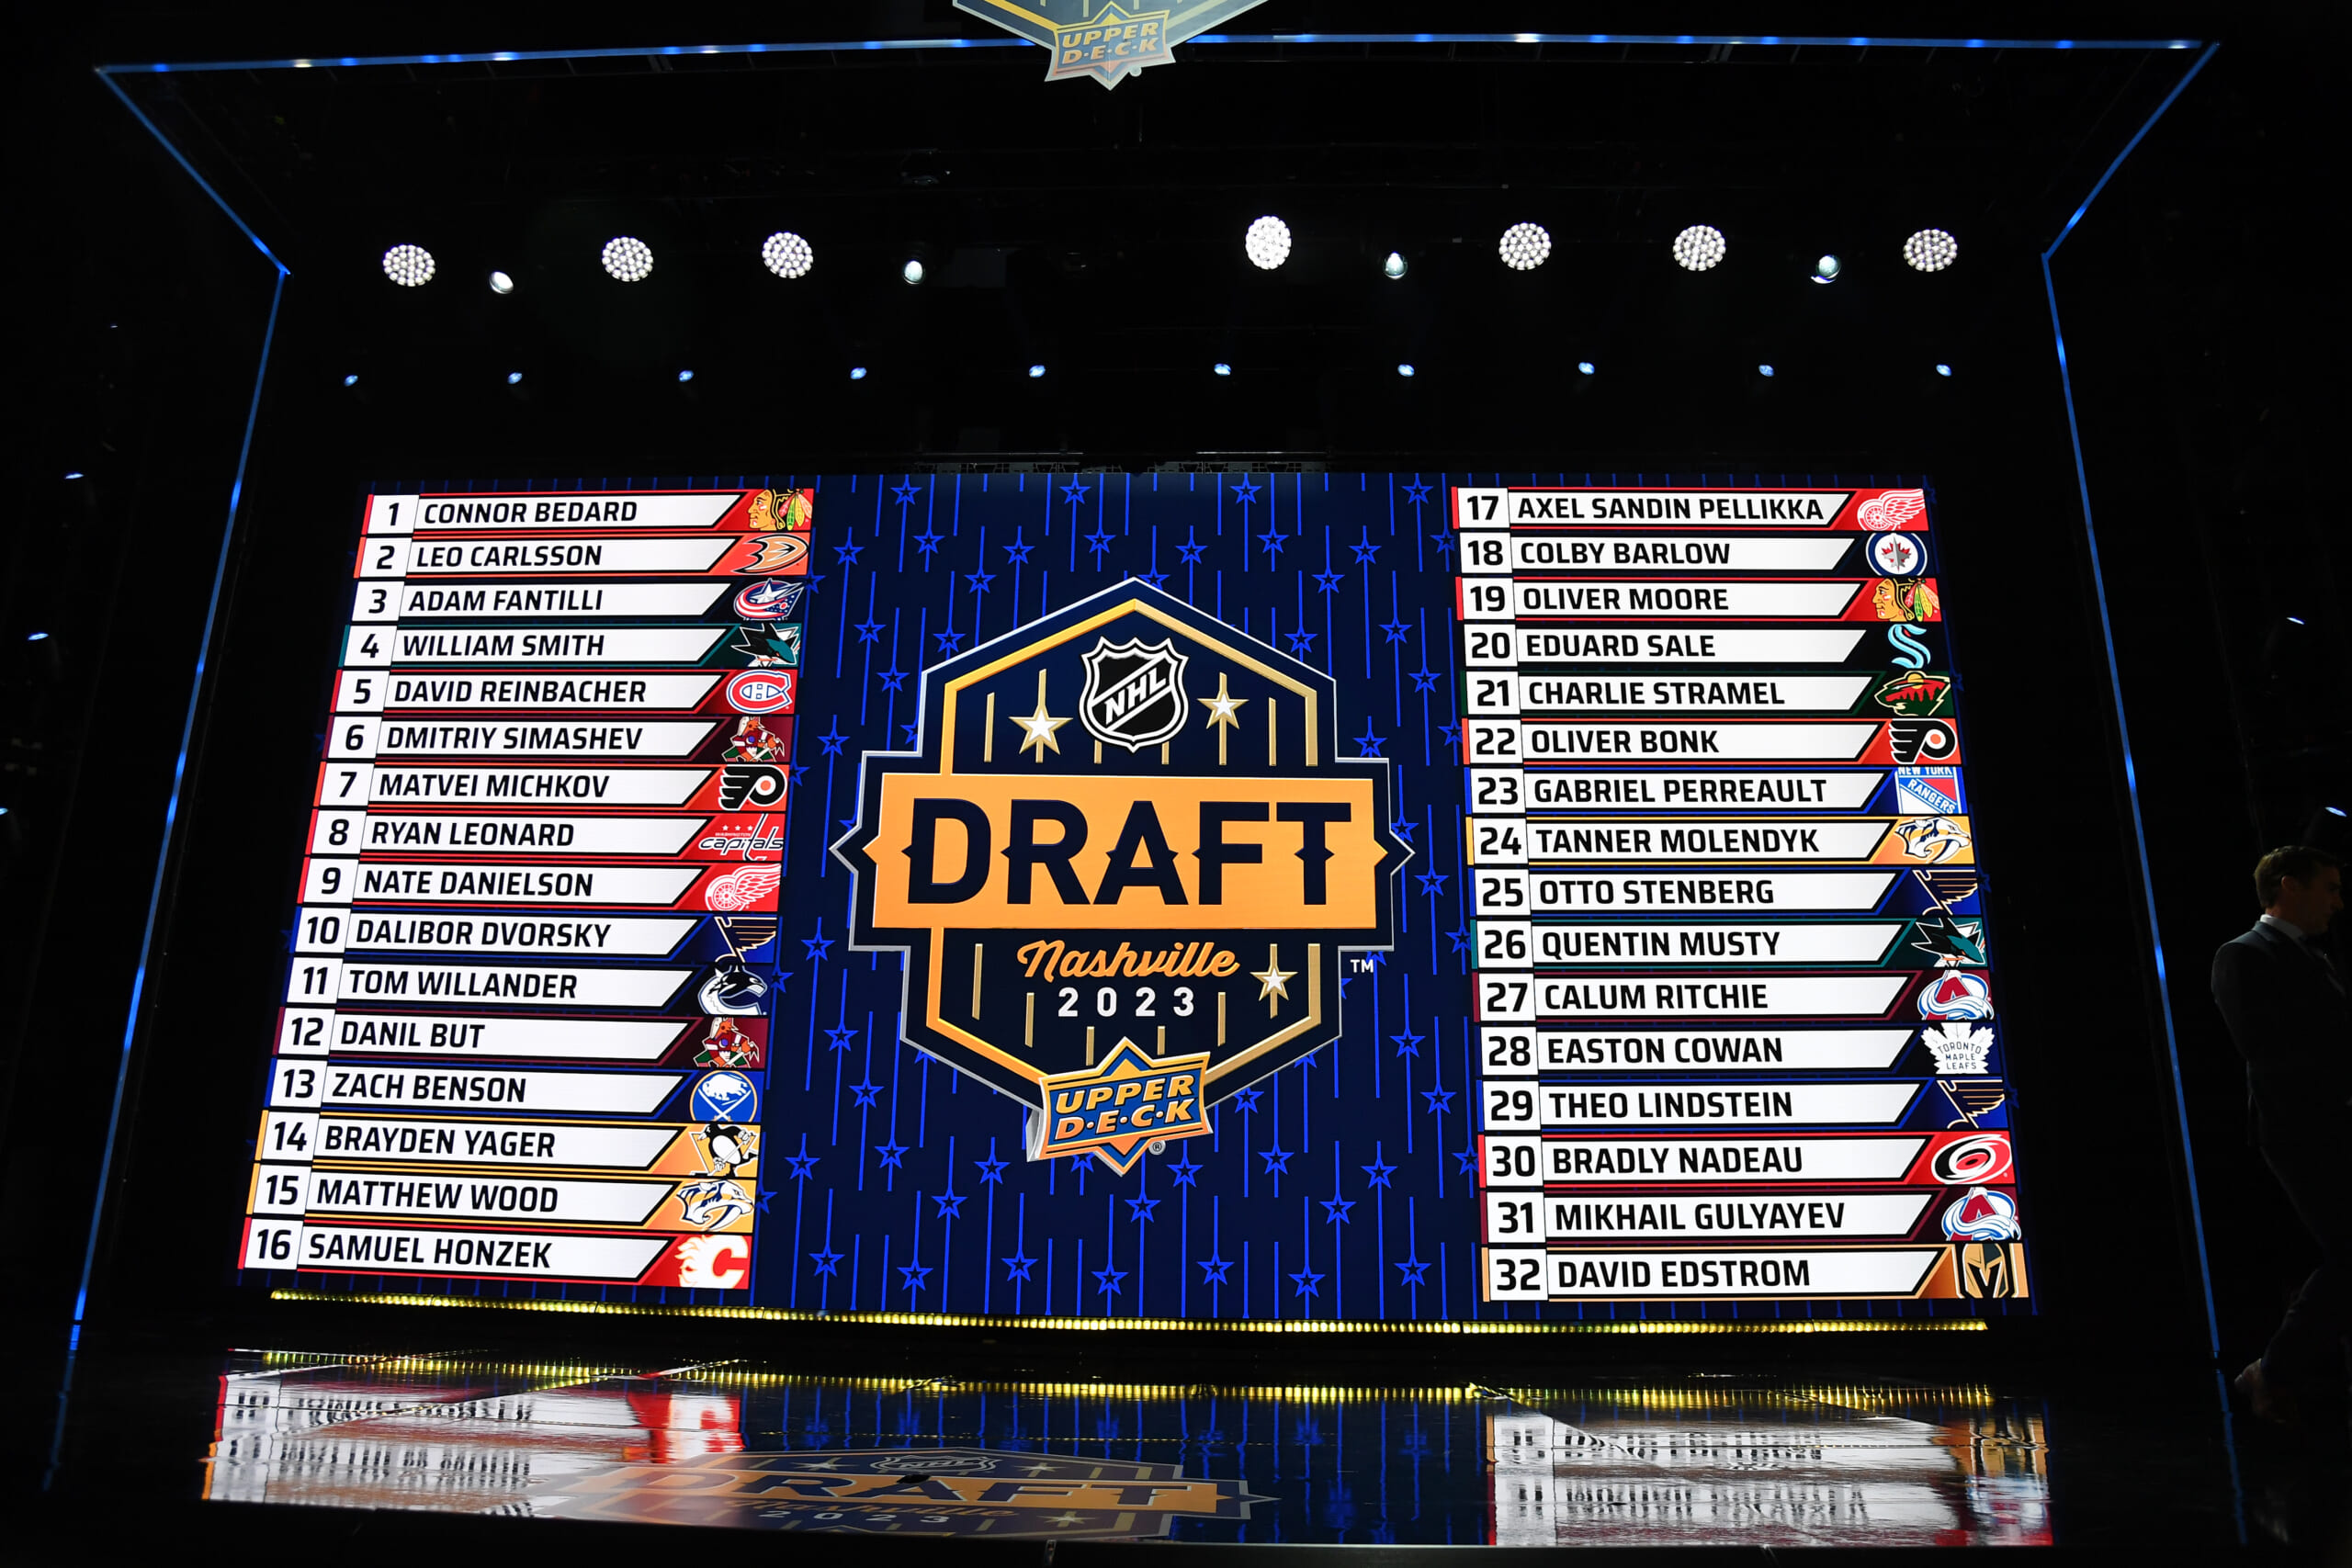 Rangers conclude NHL Draft by selecting 2 defensemen and 2 forwards